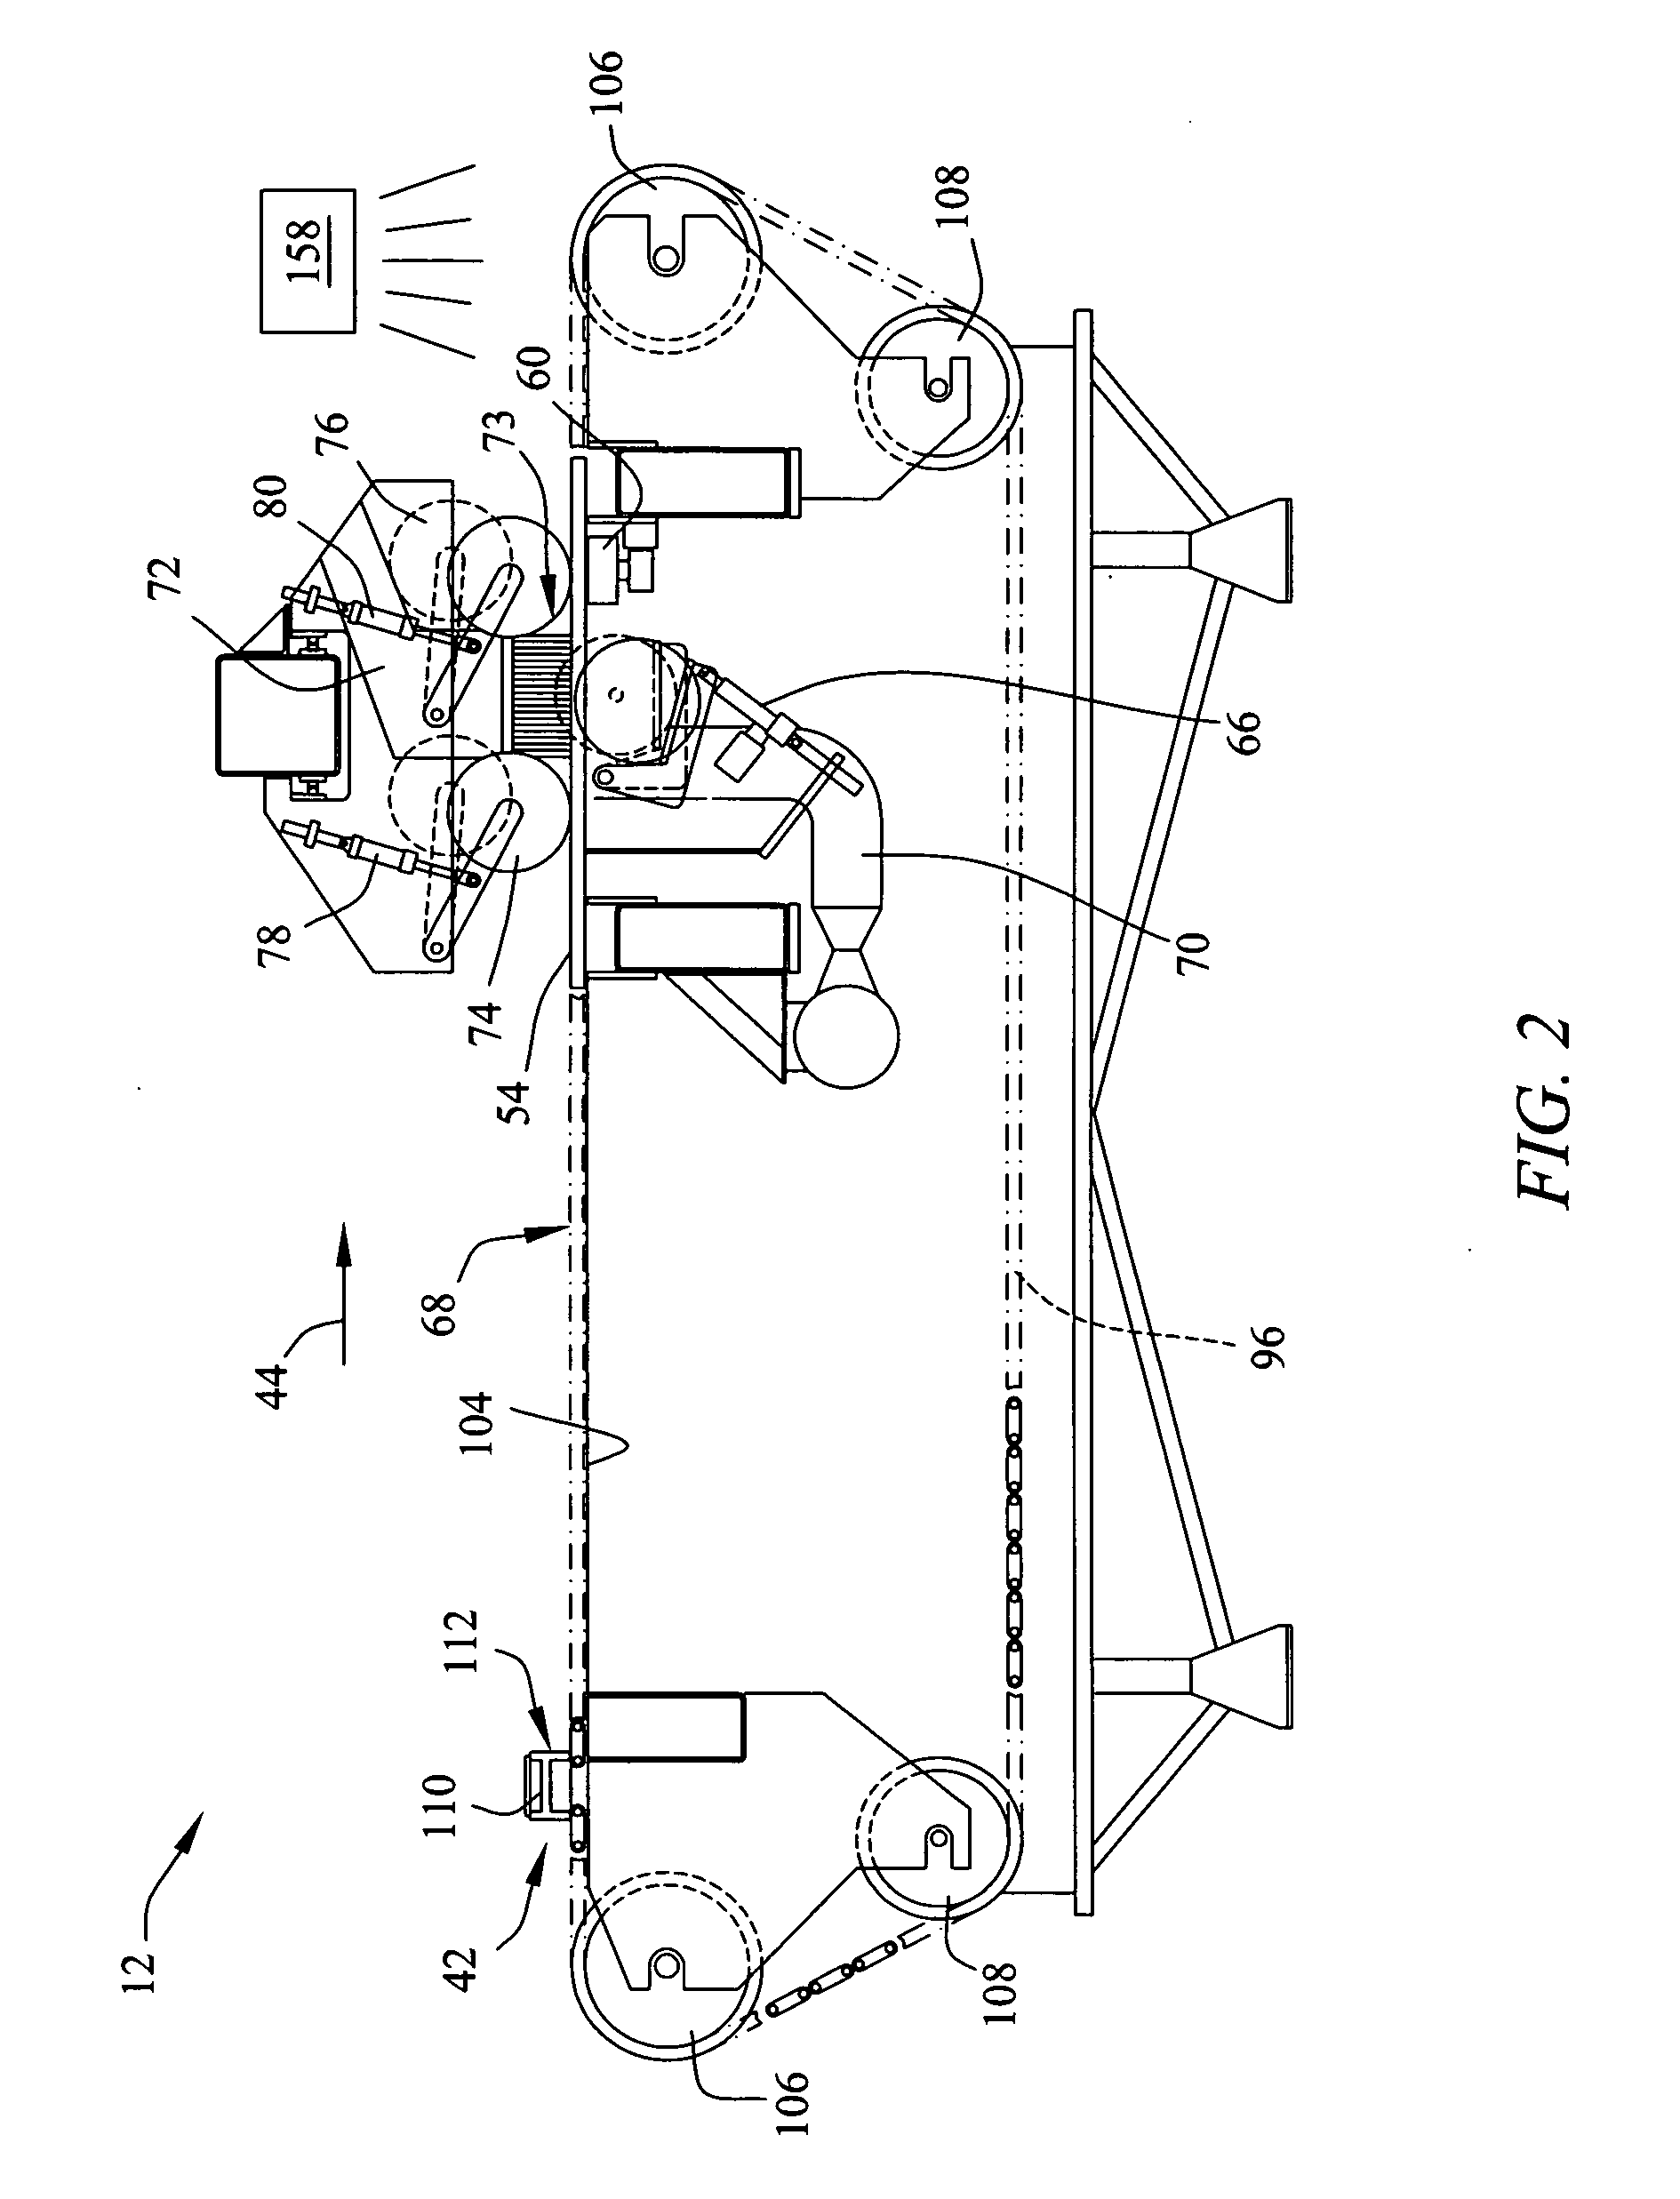 Systems and methods for end squaring and dividing elongated materials